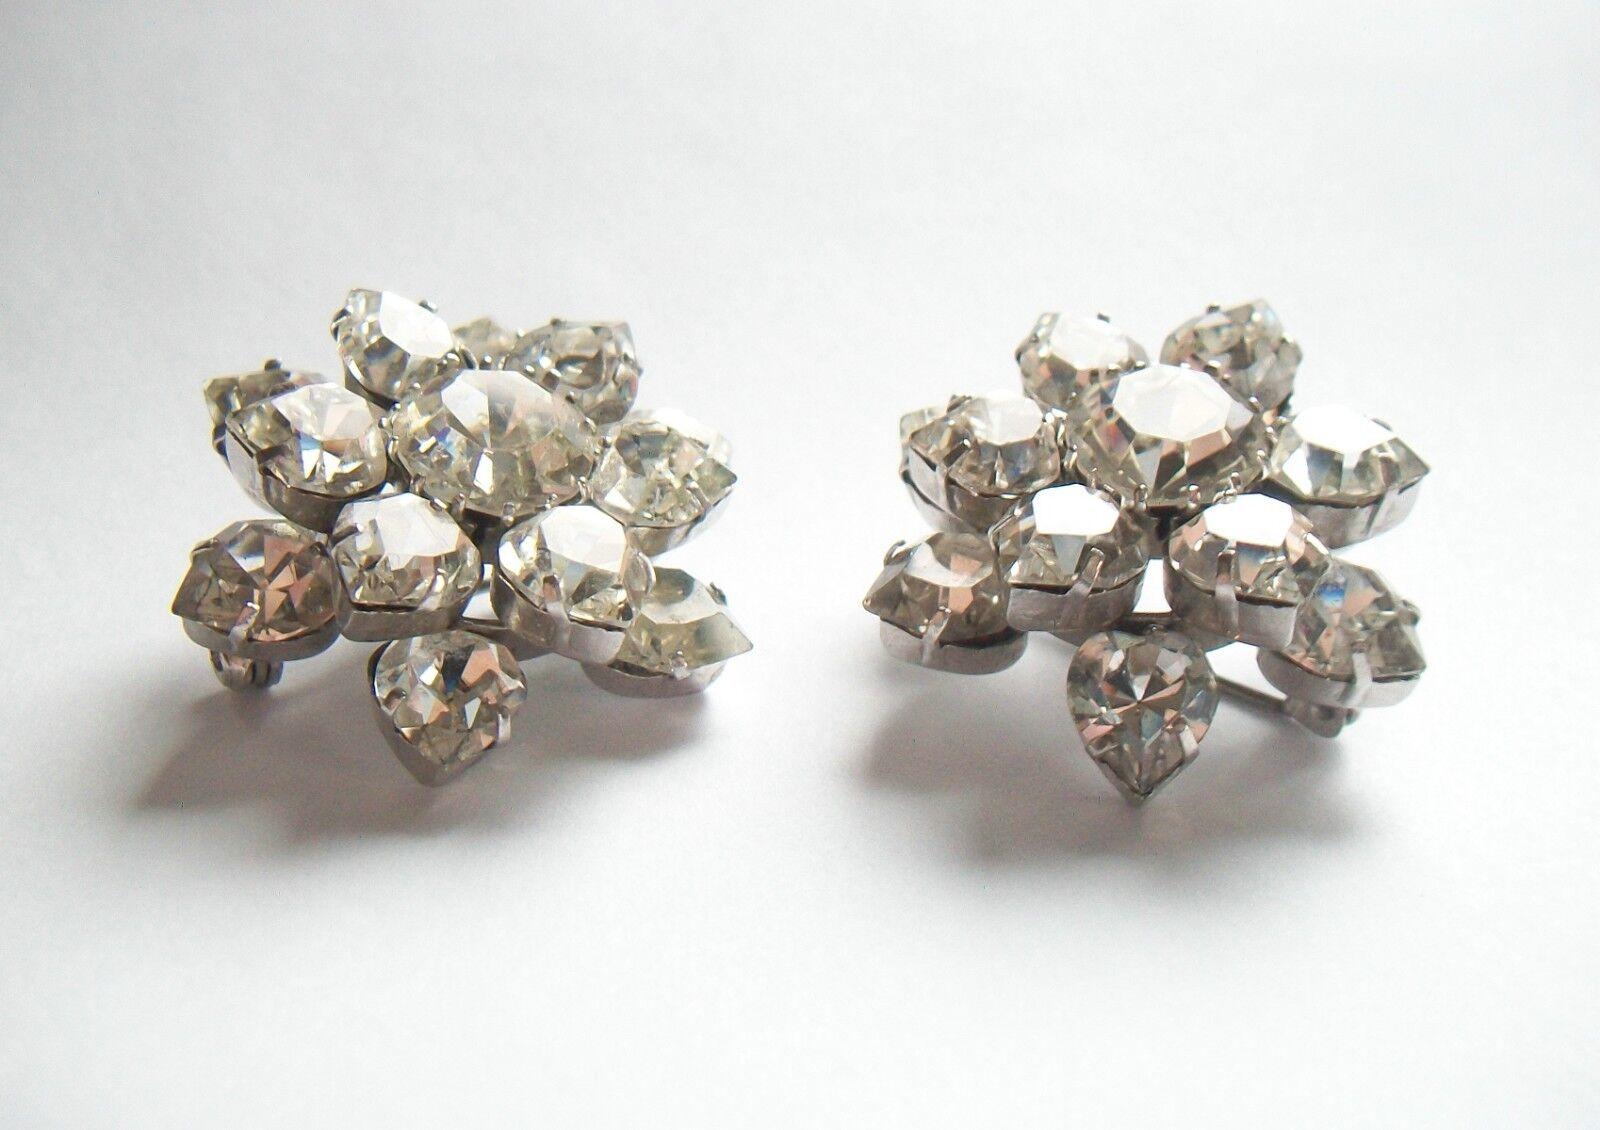 Vintage Pair Austrian Crystal Rhinestone Brooches, Unsigned, Mid-20th Century For Sale 1